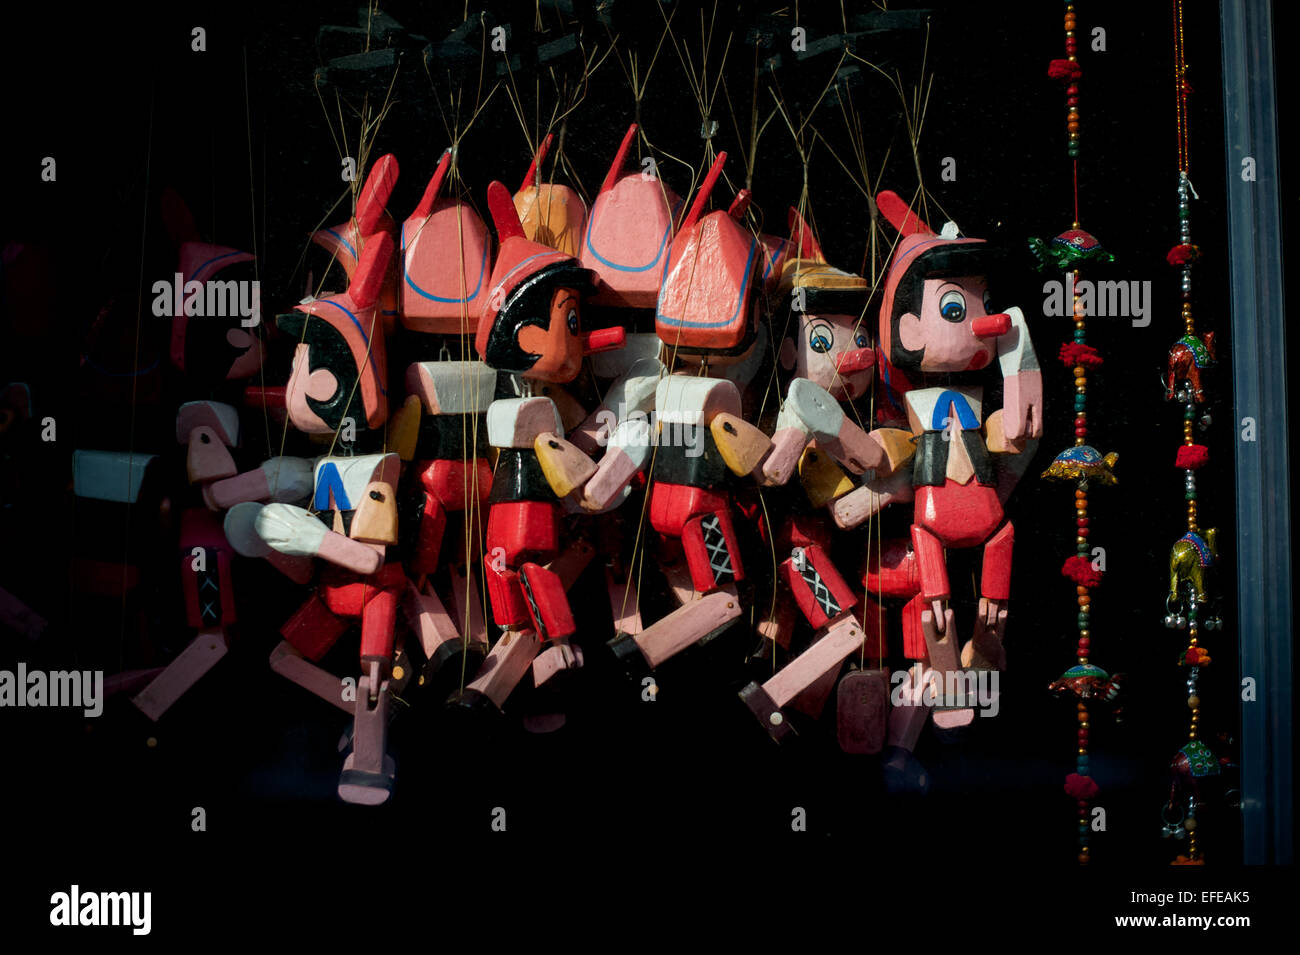 Wooden puppets for sale are pictured as part of a photo essay on winter breaks in Istanbul, Turkey. Stock Photo